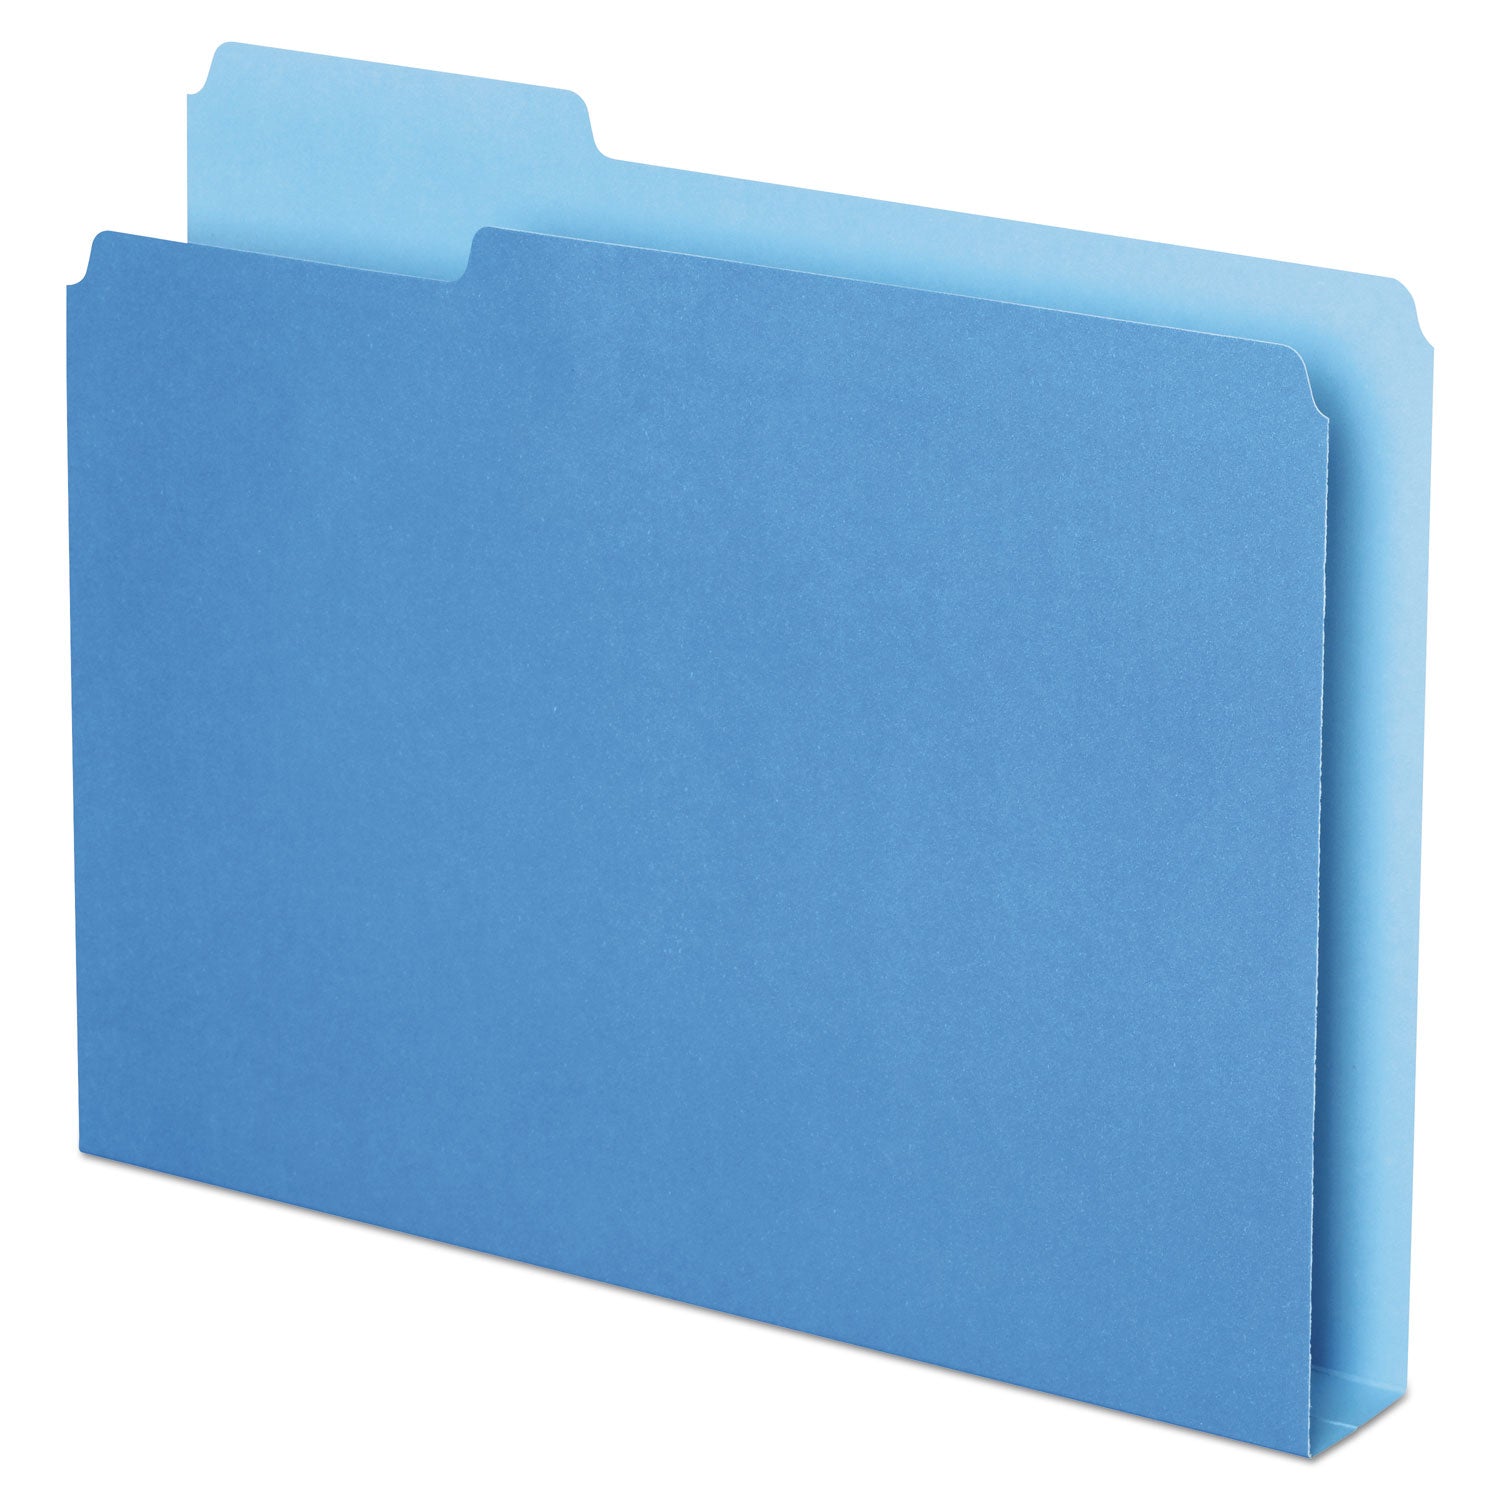 double-stuff-file-folders-1-3-cut-tabs-assorted-letter-size-15-expansion-blue-50-pack_pfx54455 - 1